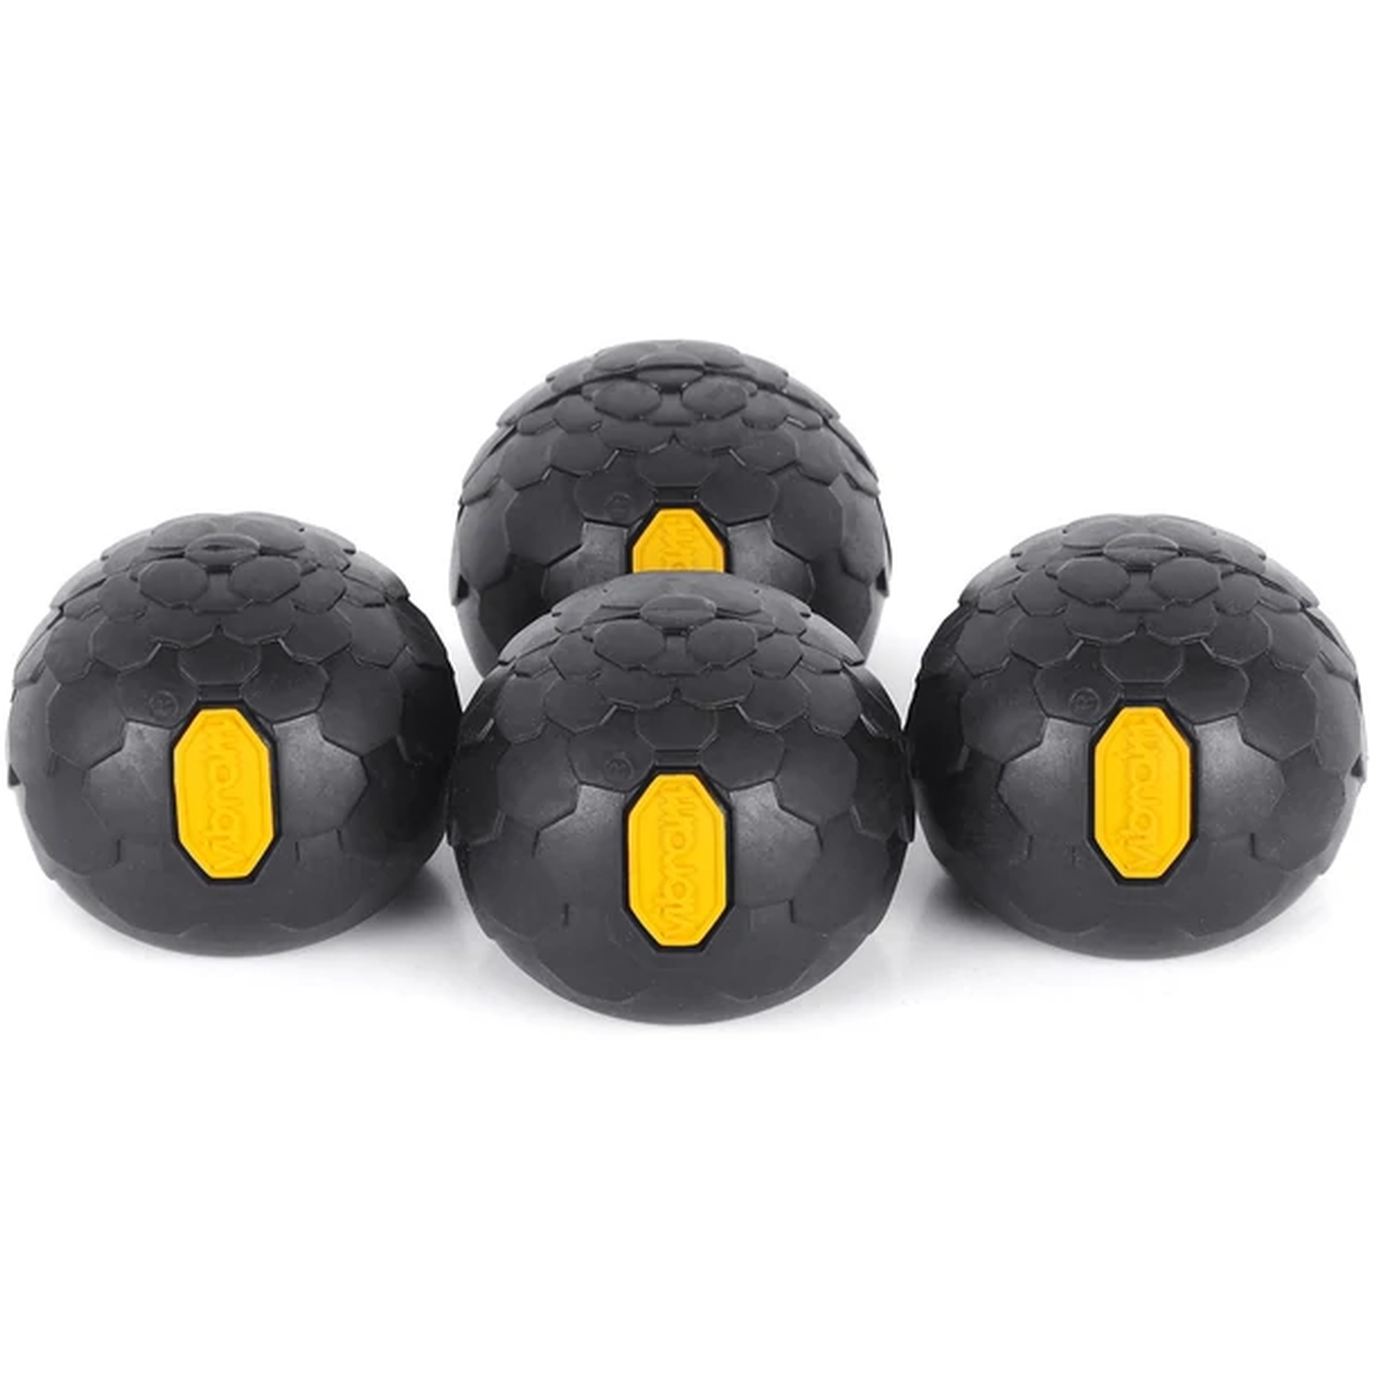 Picture of Helinox Vibram Ball Feet Set - 55mm for Camping Chair - black -4 pcs.